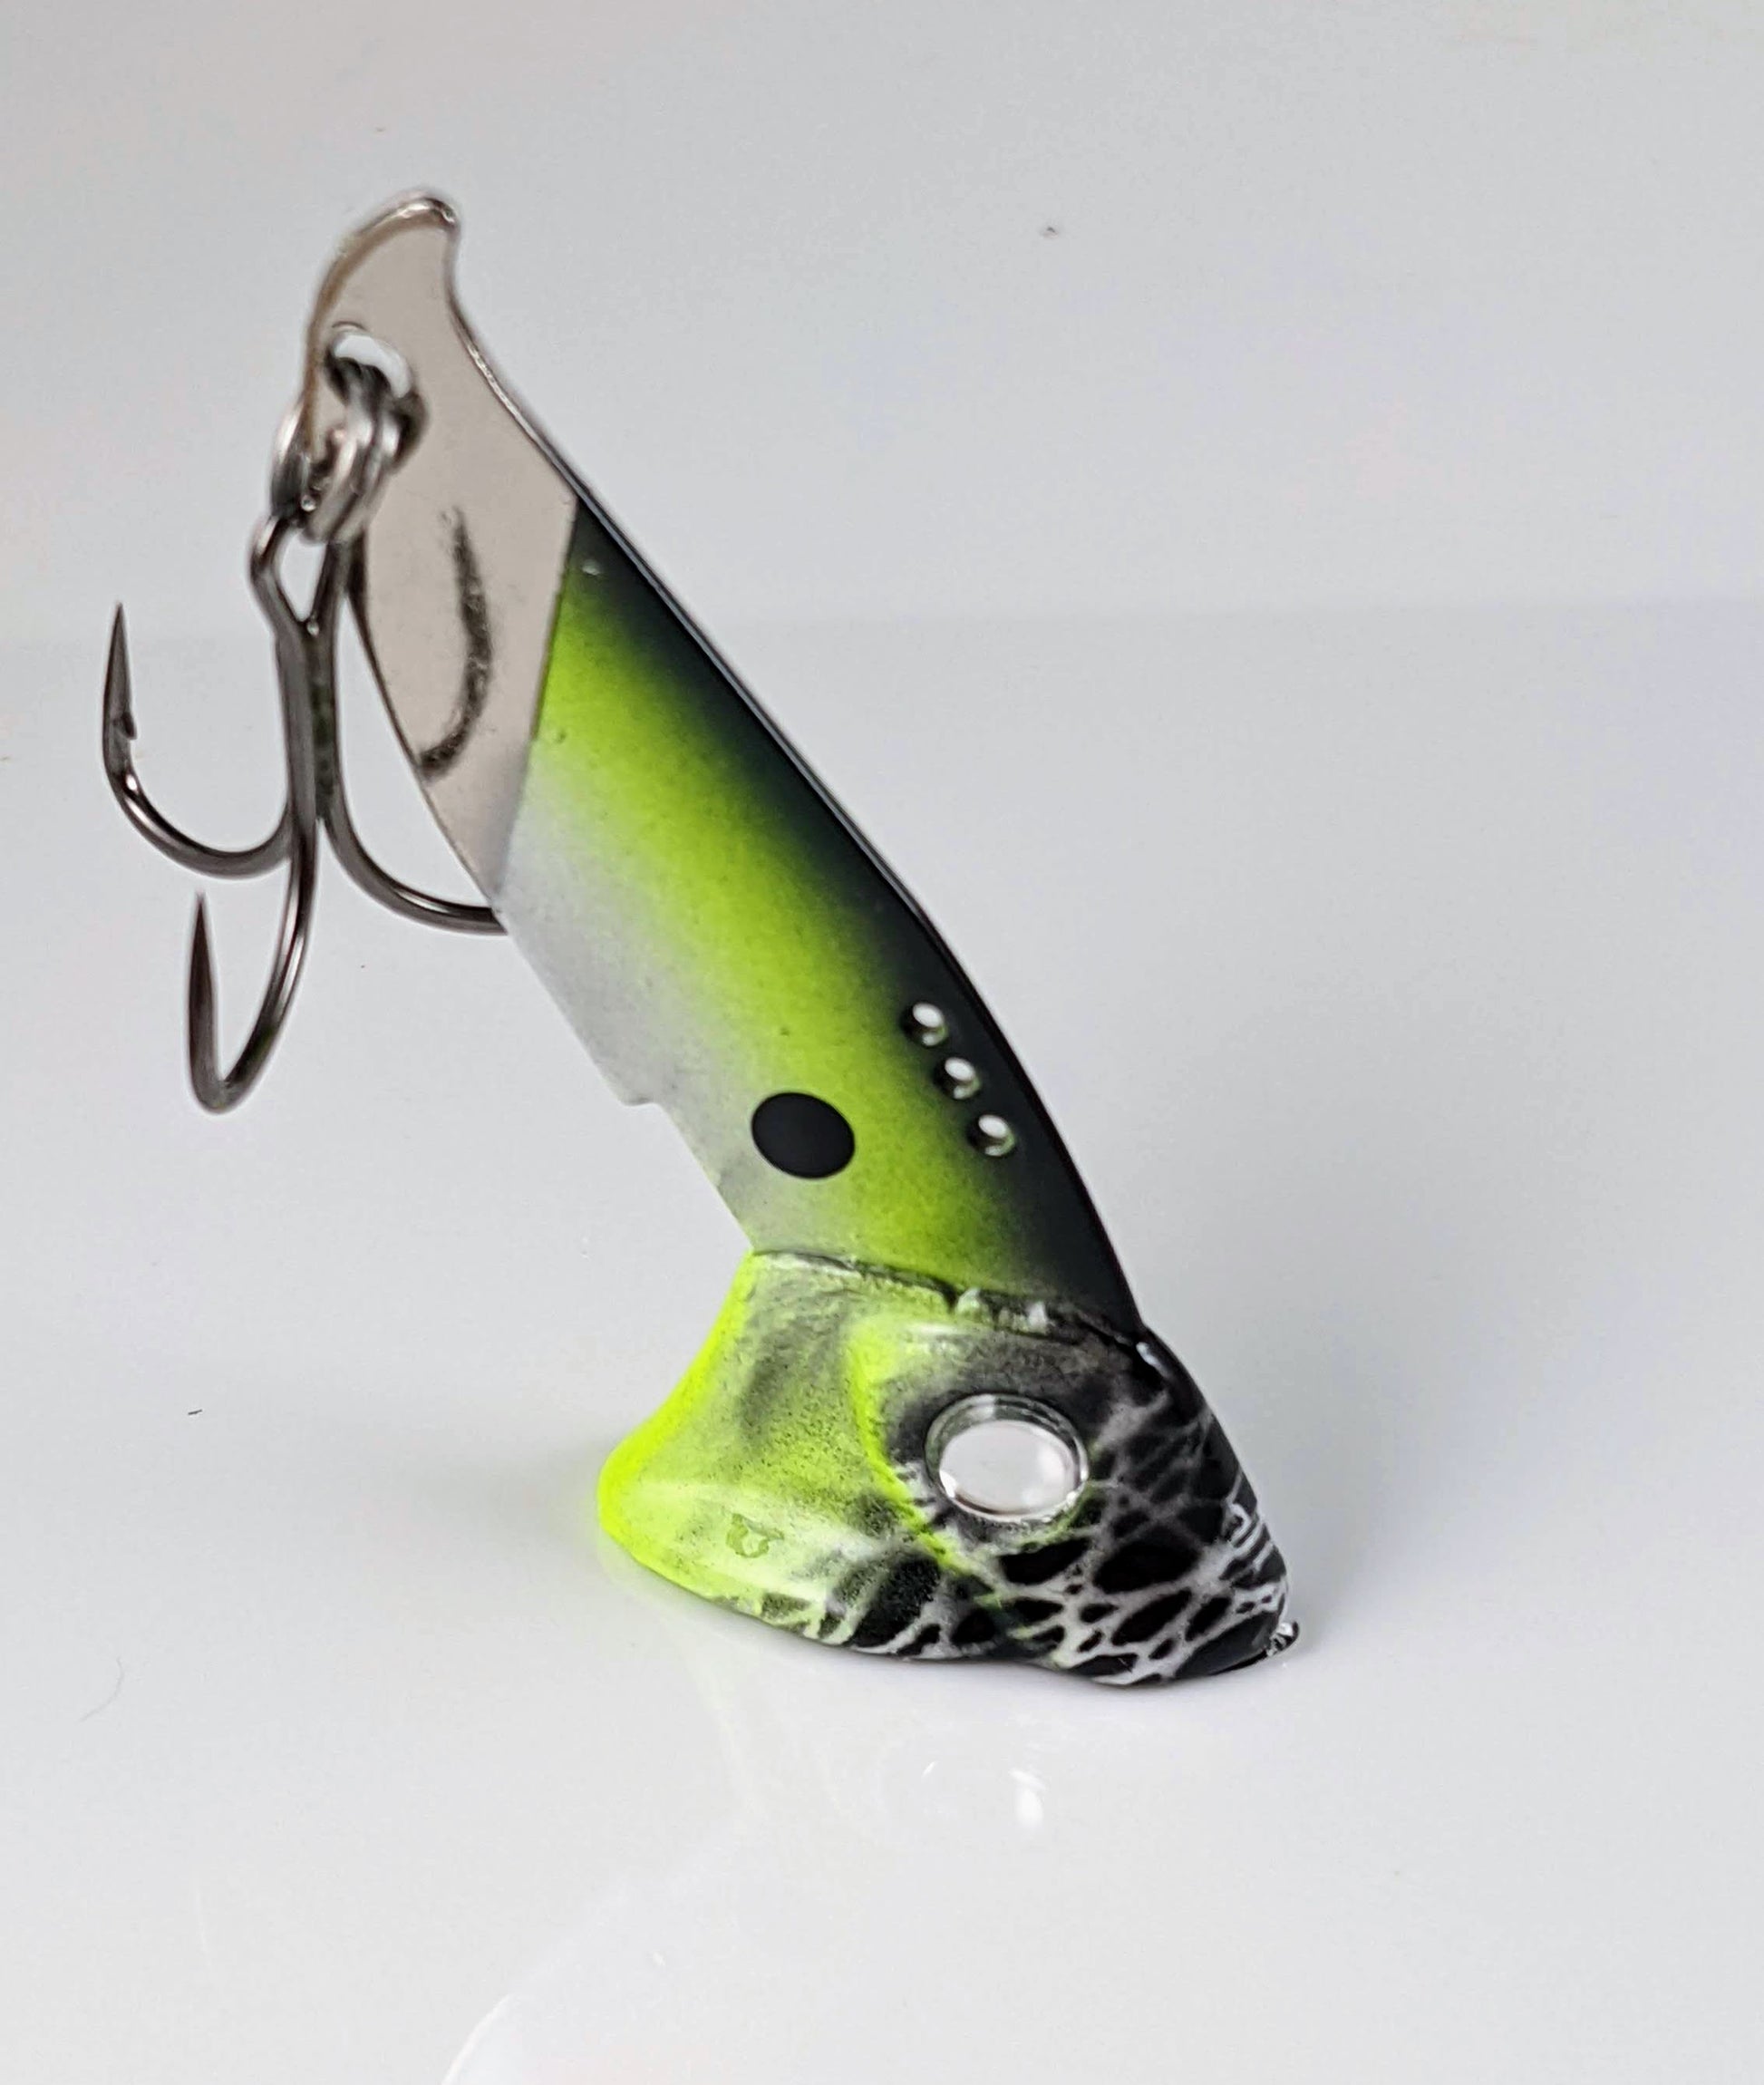 Vertical Minnow Blade Bait - Shiner by Vertical Jigs and Lures